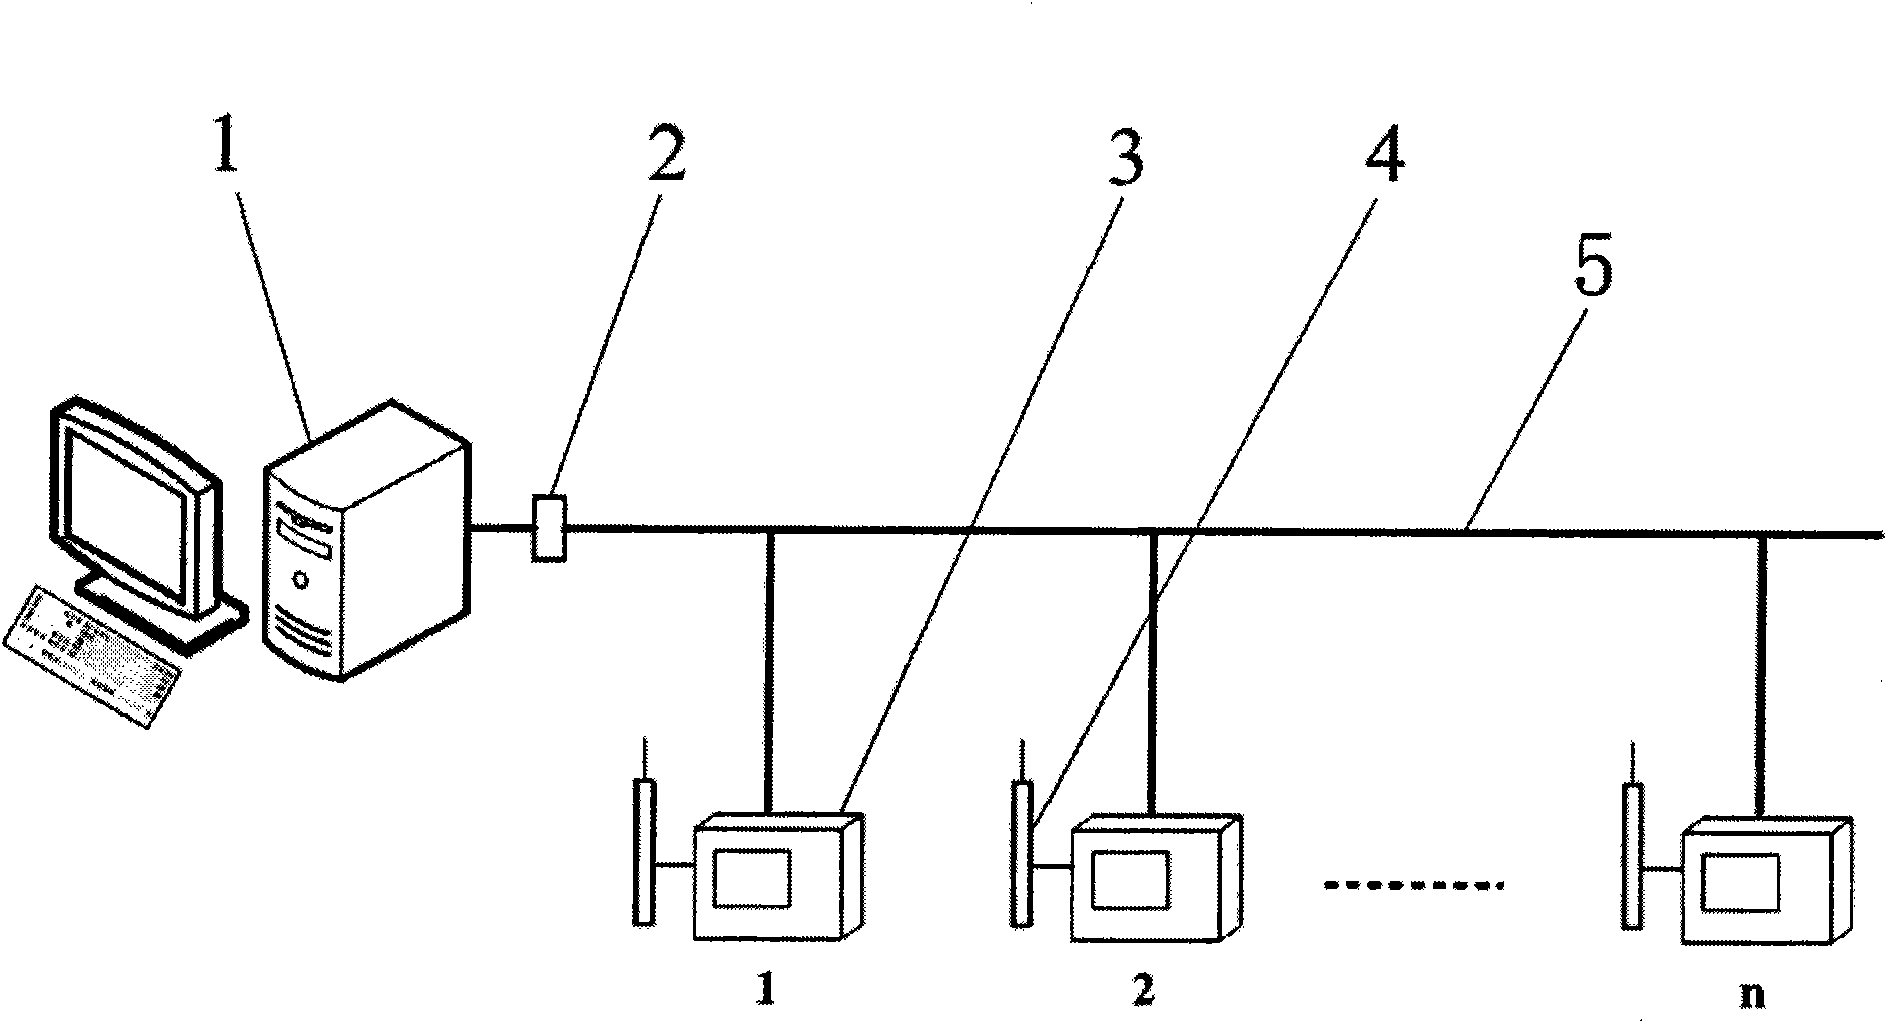 Semi-physical teaching system of marine automatic identification system